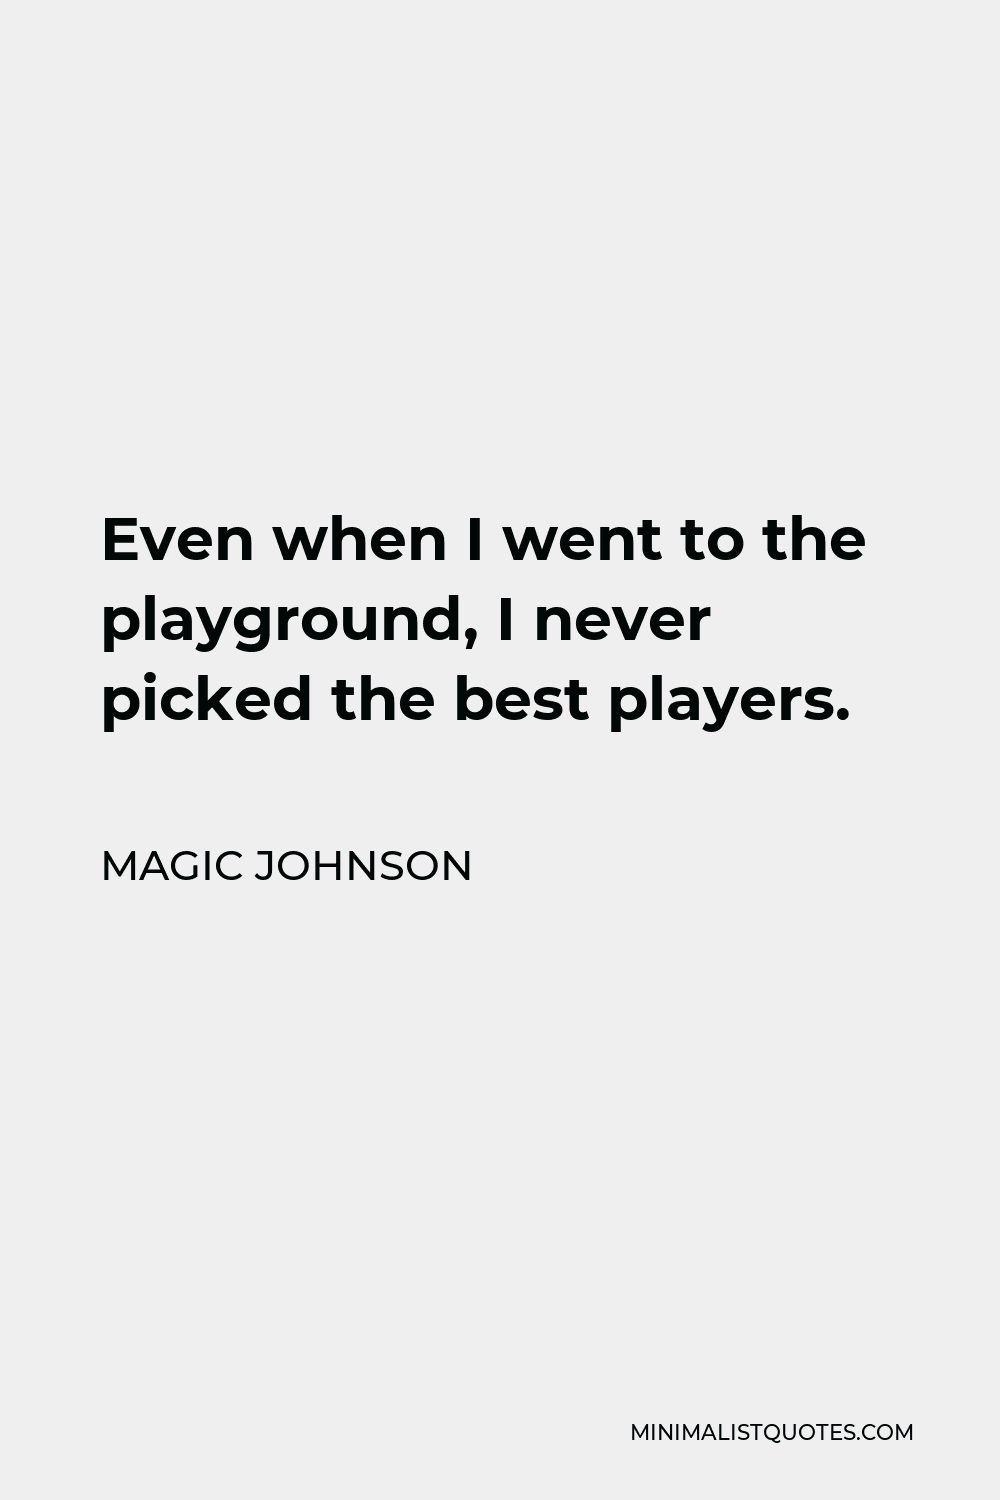 Magic Johnson Quote - Even when I went to the playground, I never picked the best players.